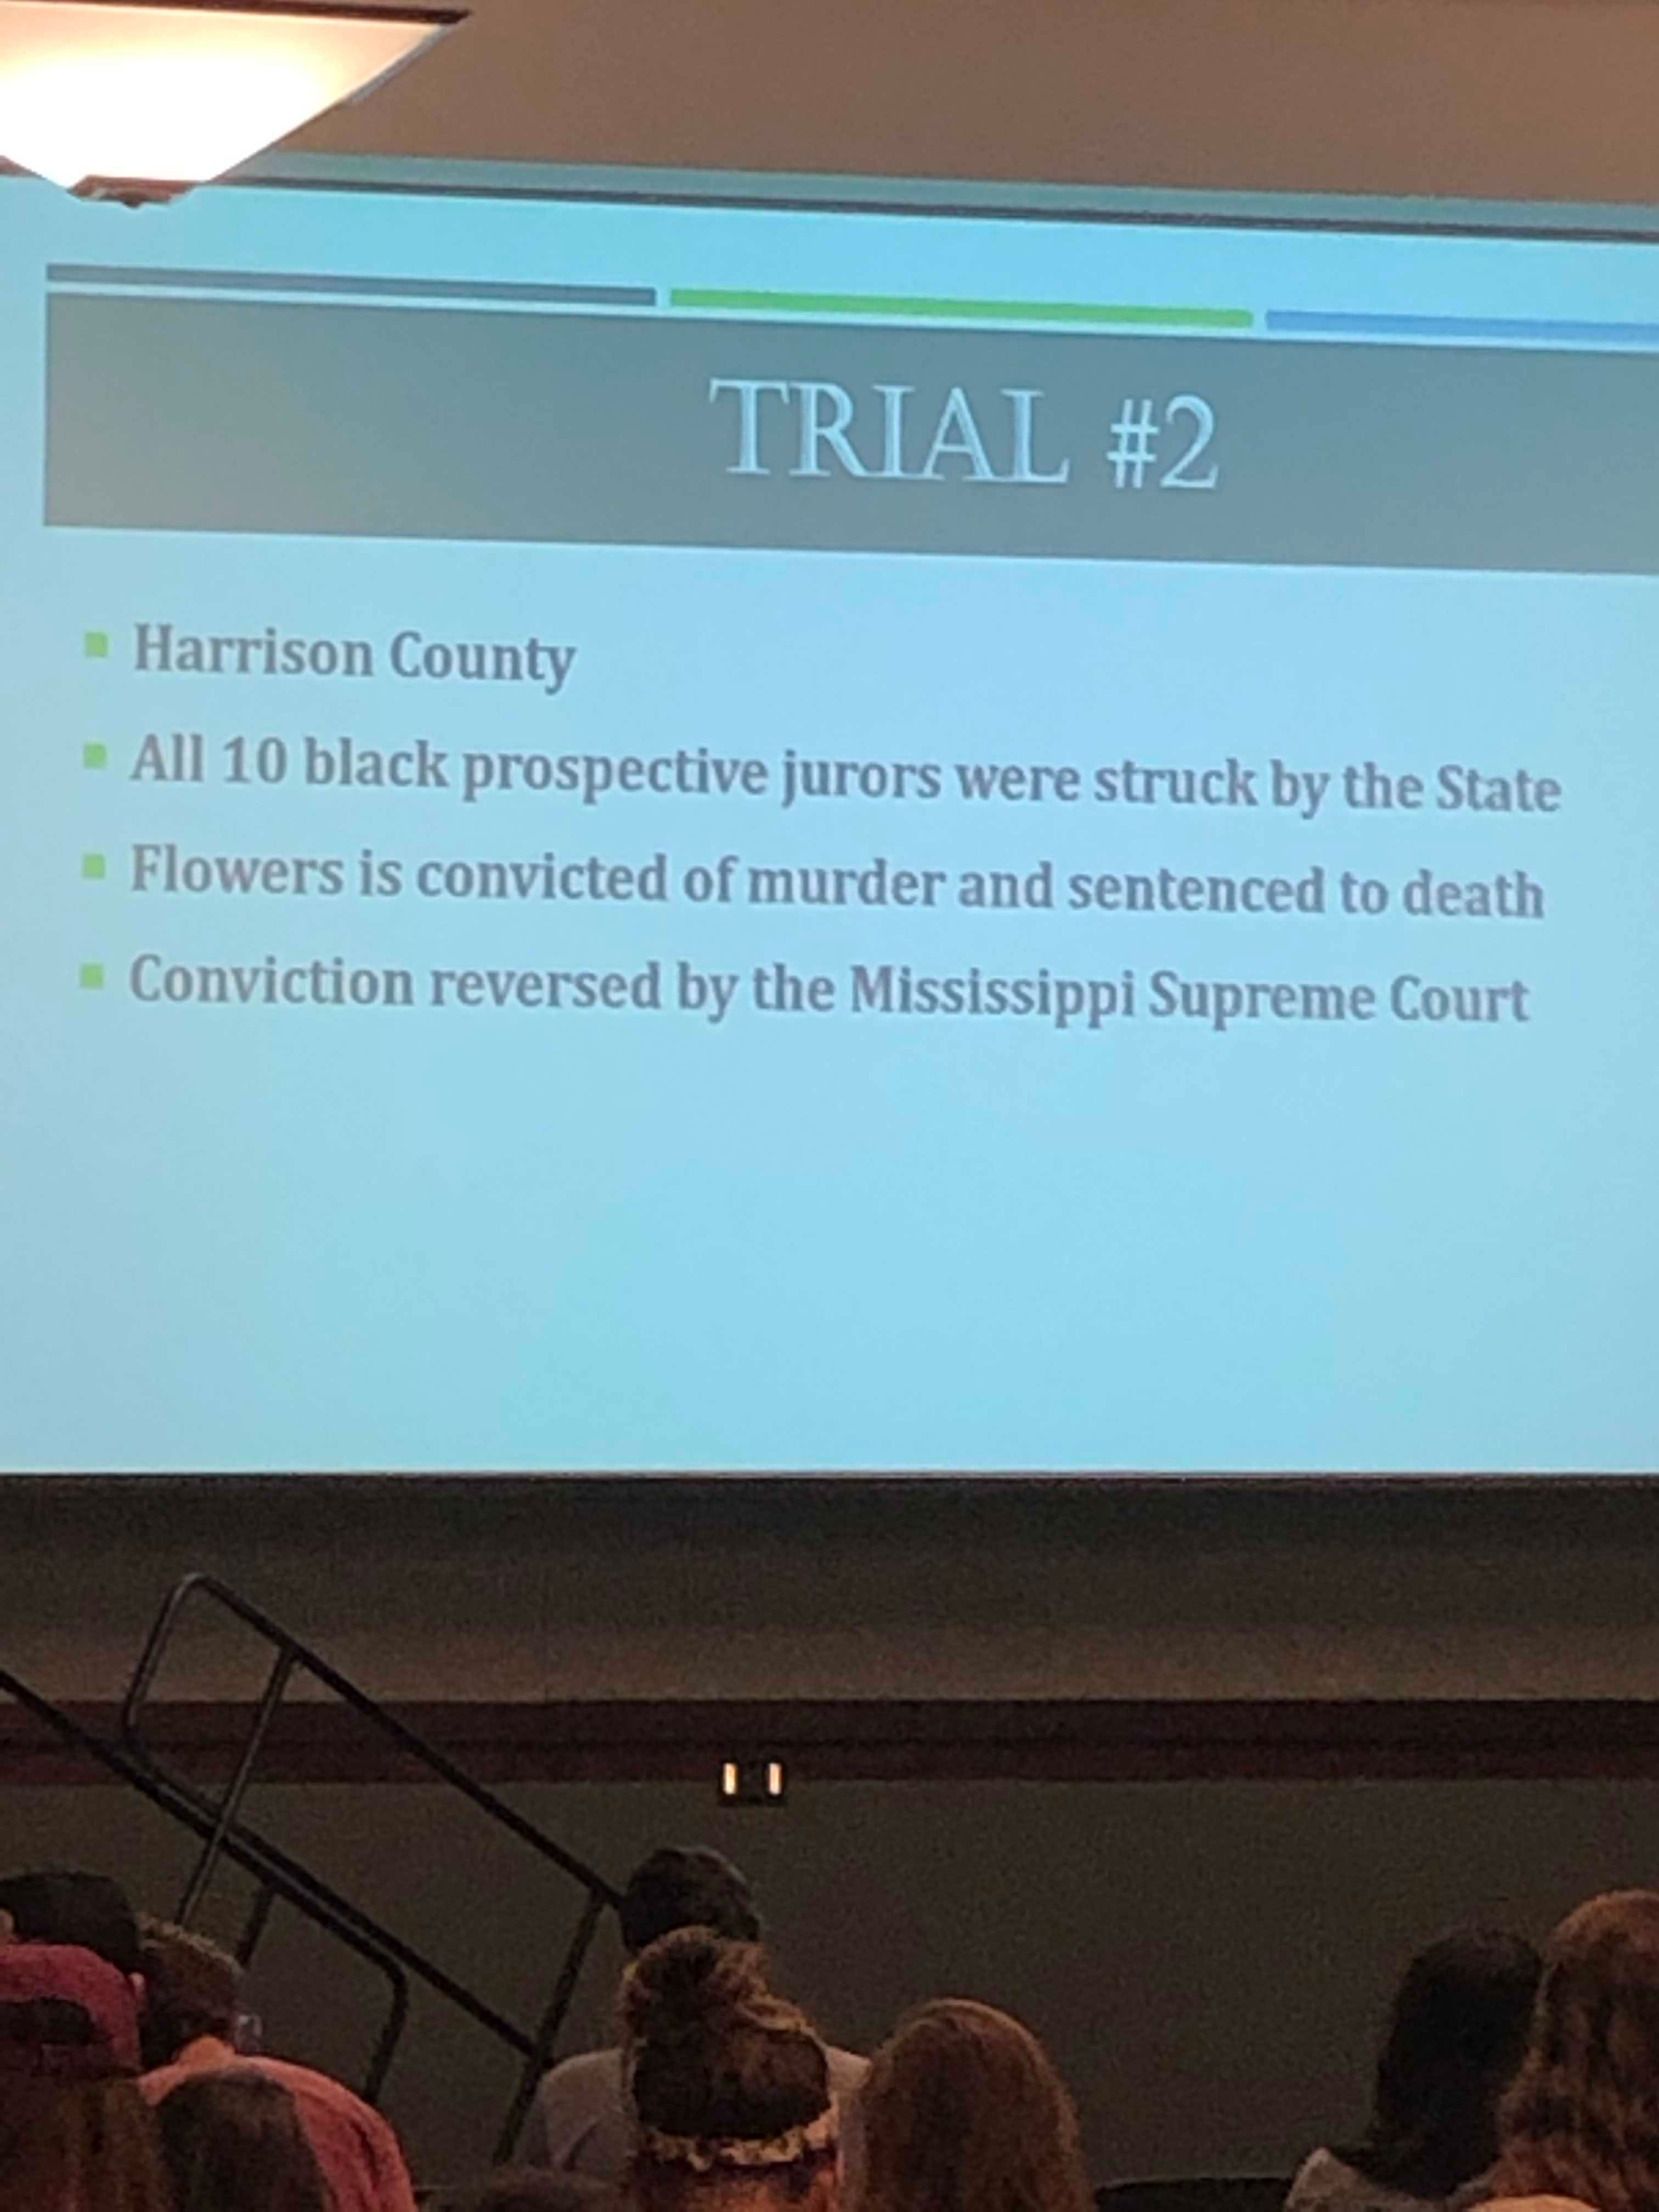 PowerPoint slide of Curtis Flowers 2nd Murder Trial bullet points